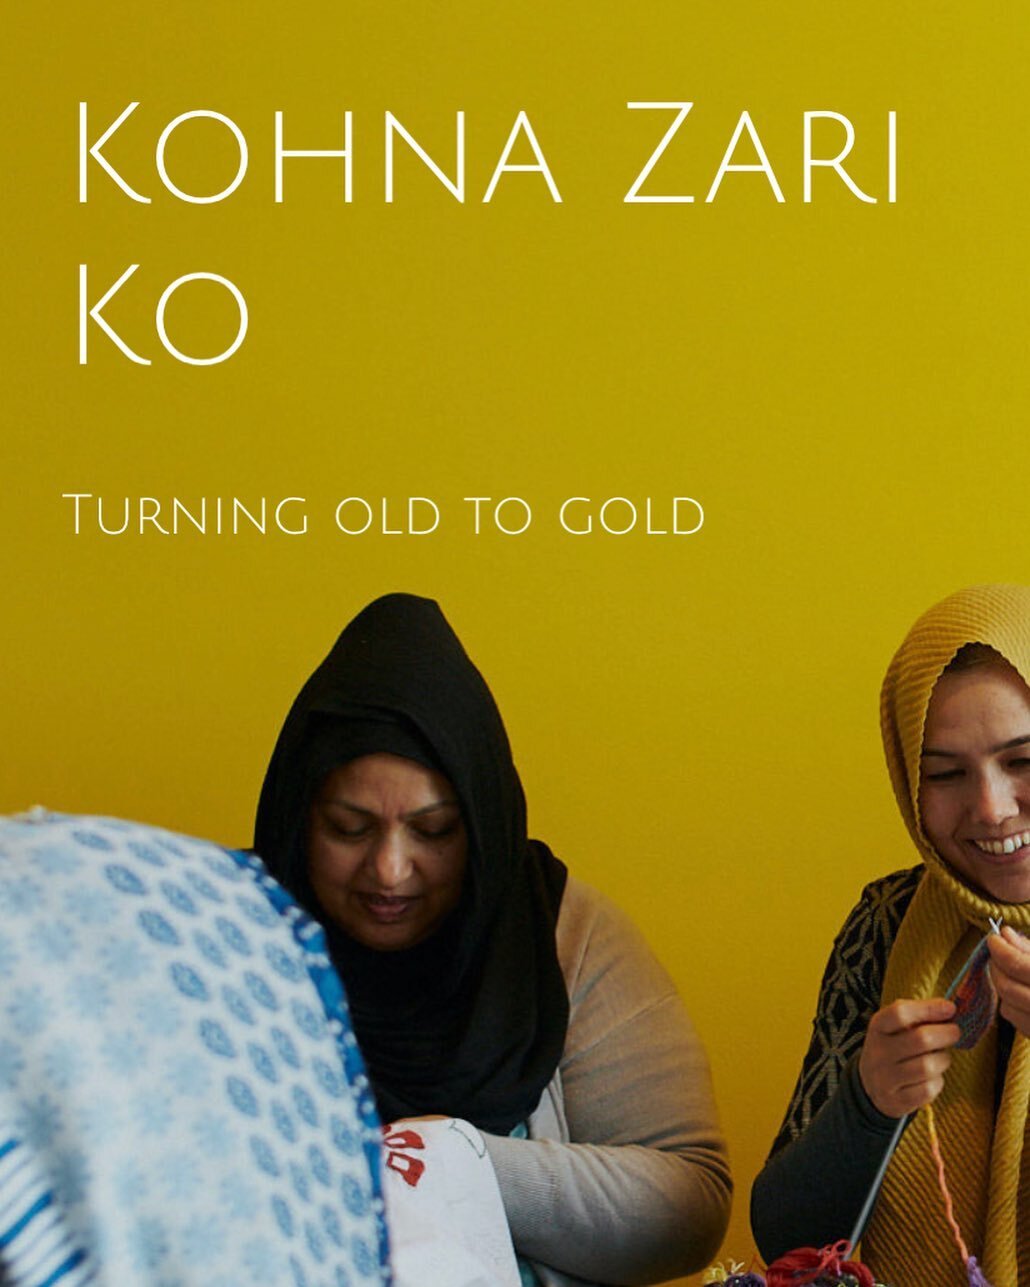 Our website is now live! Check out the services we have on offer and learn more about our group. Head to kohnazariko.co.nz 

Special thanks to @lightboxprojects @objectspace for support, our funders and @gretavanderstar for the stunning images!